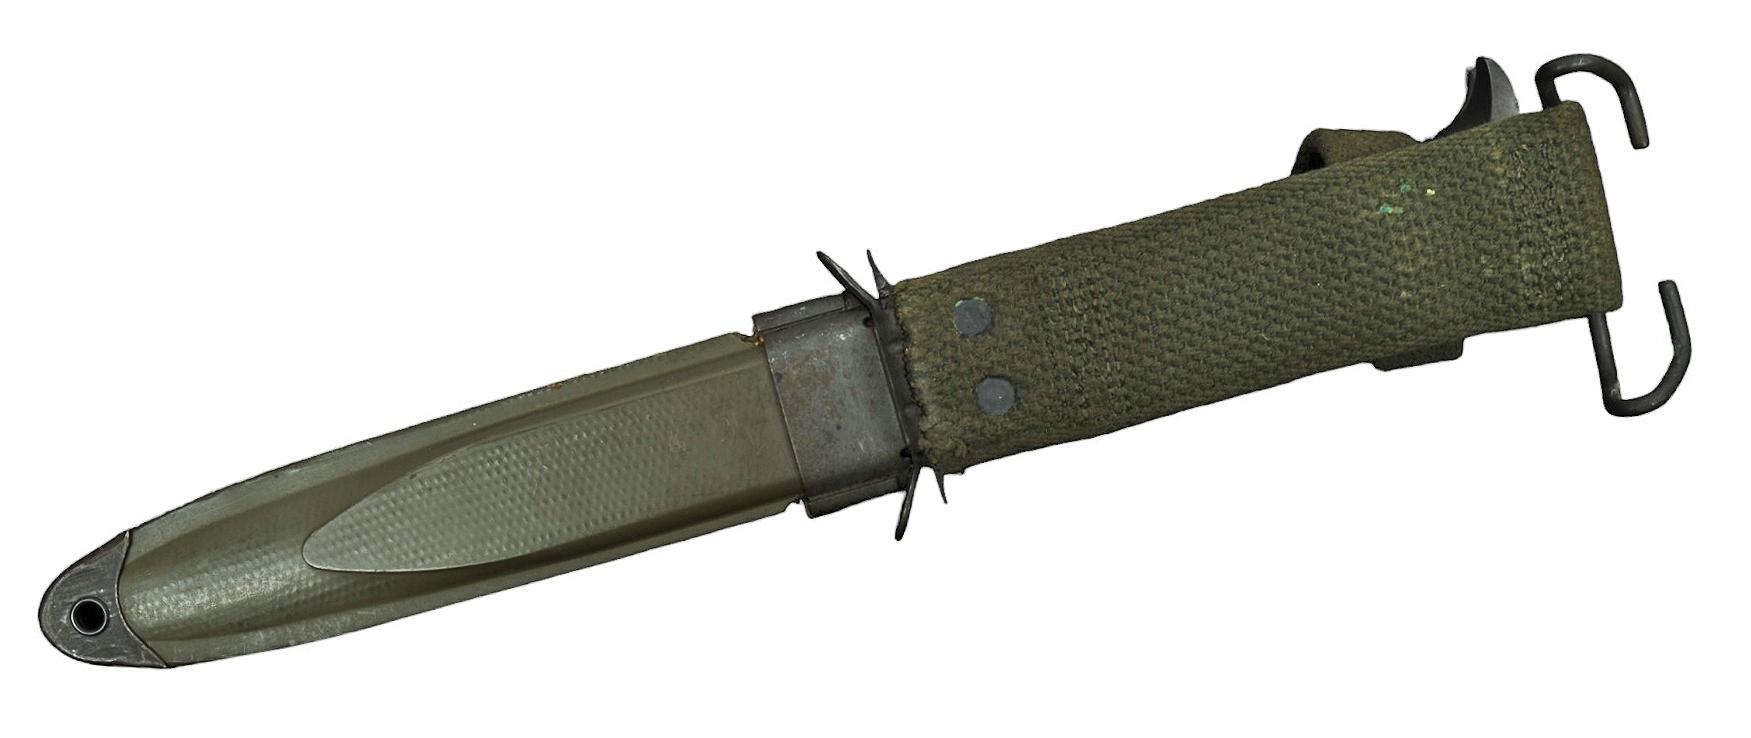 Scarce Experimental US Military M7 Fighting Knife (LPT)